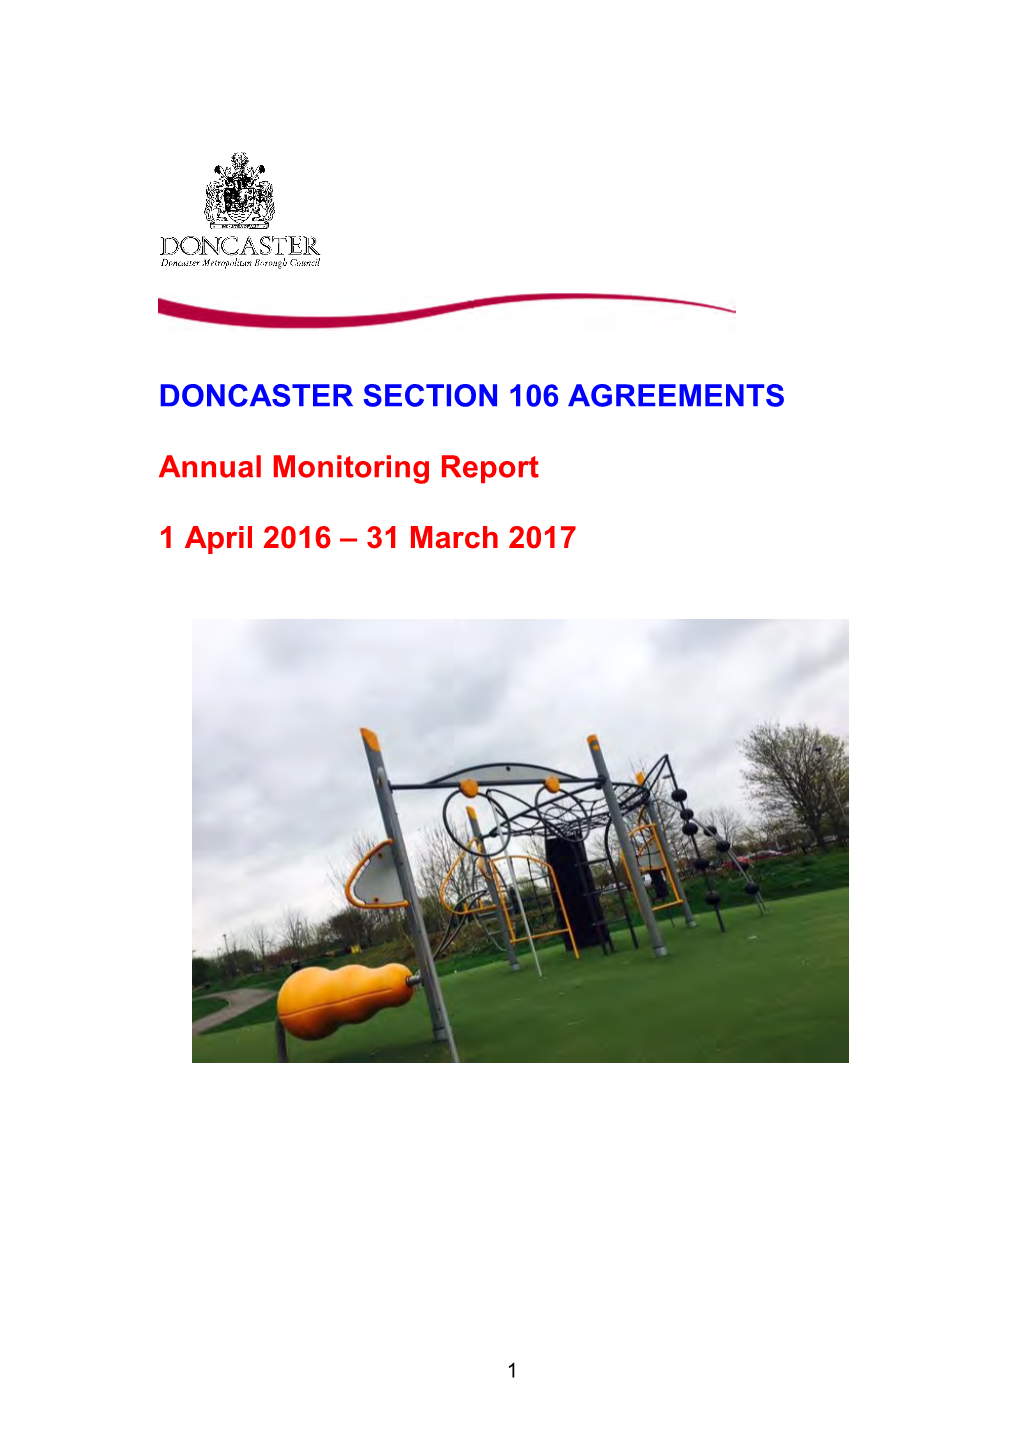 Doncaster Section 106 Agreements